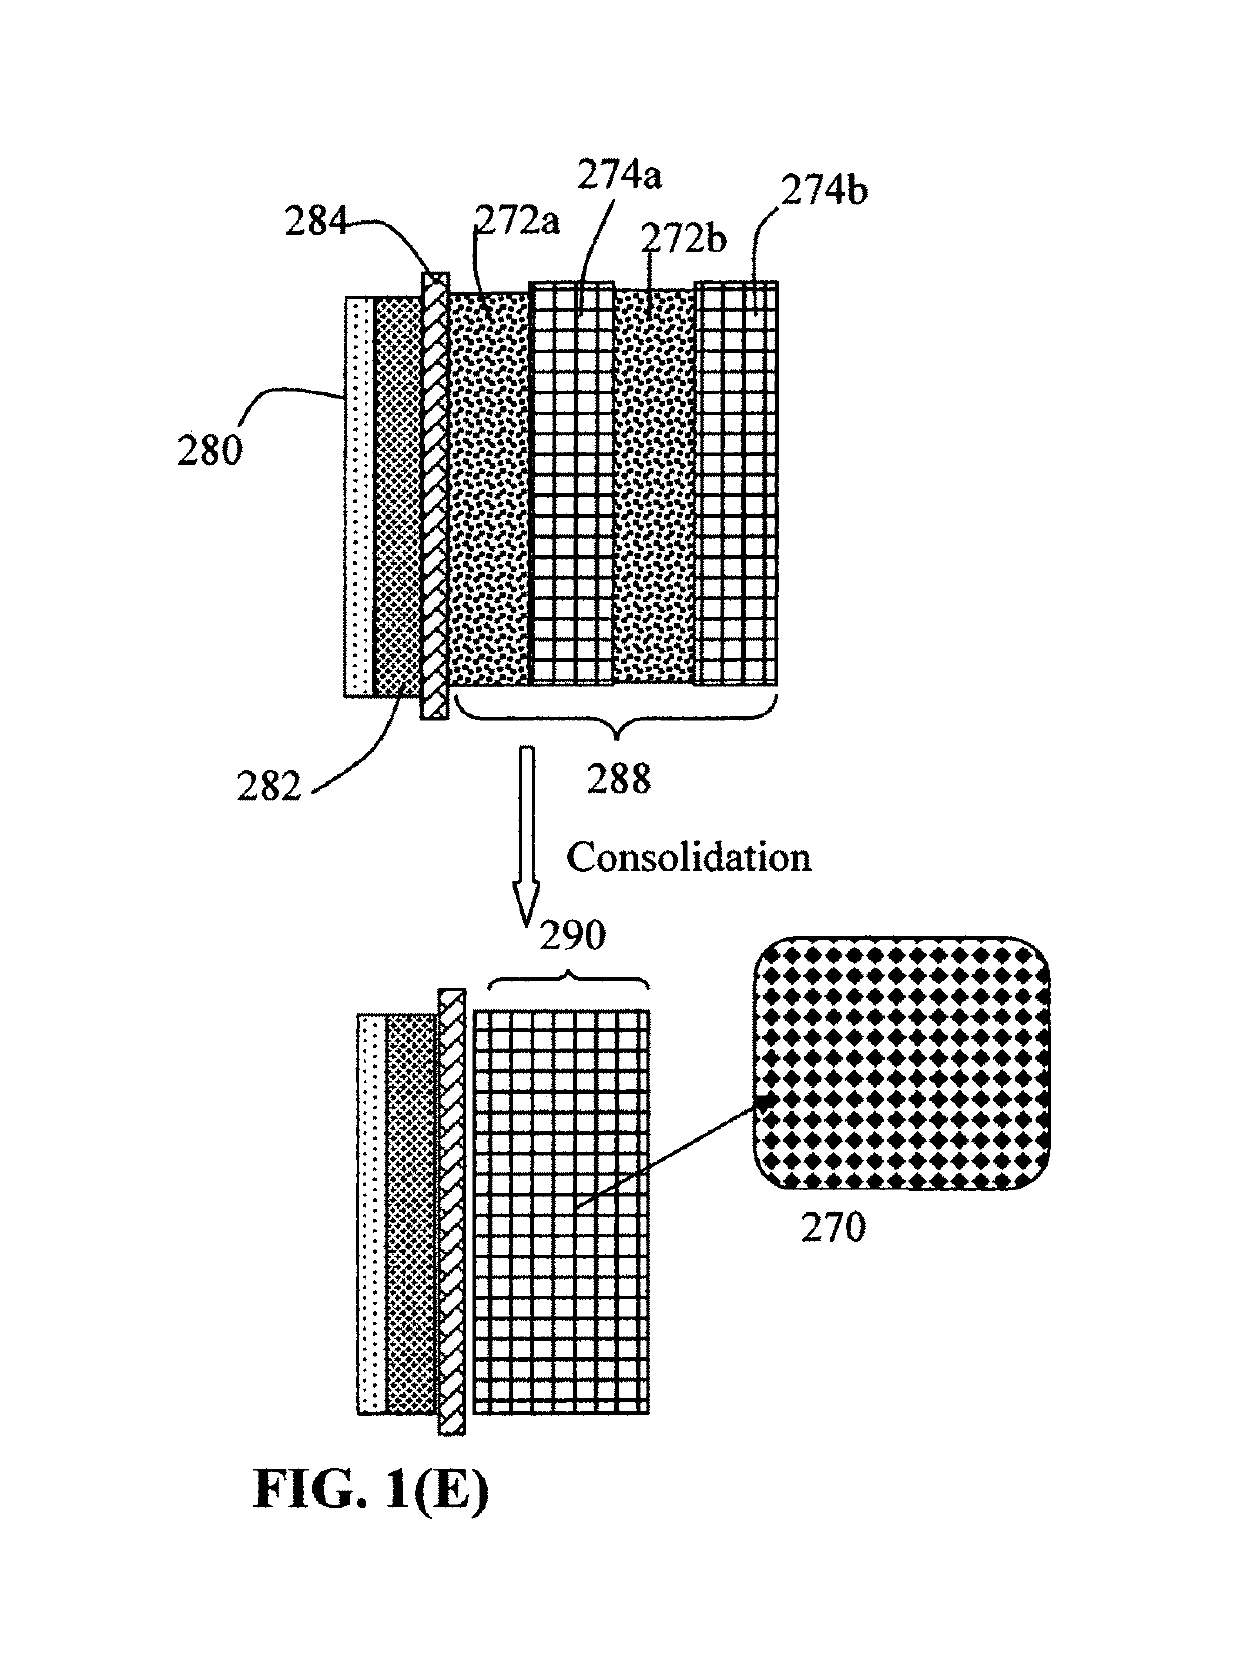 Process for producing lithium batteries having an ultra-high energy density